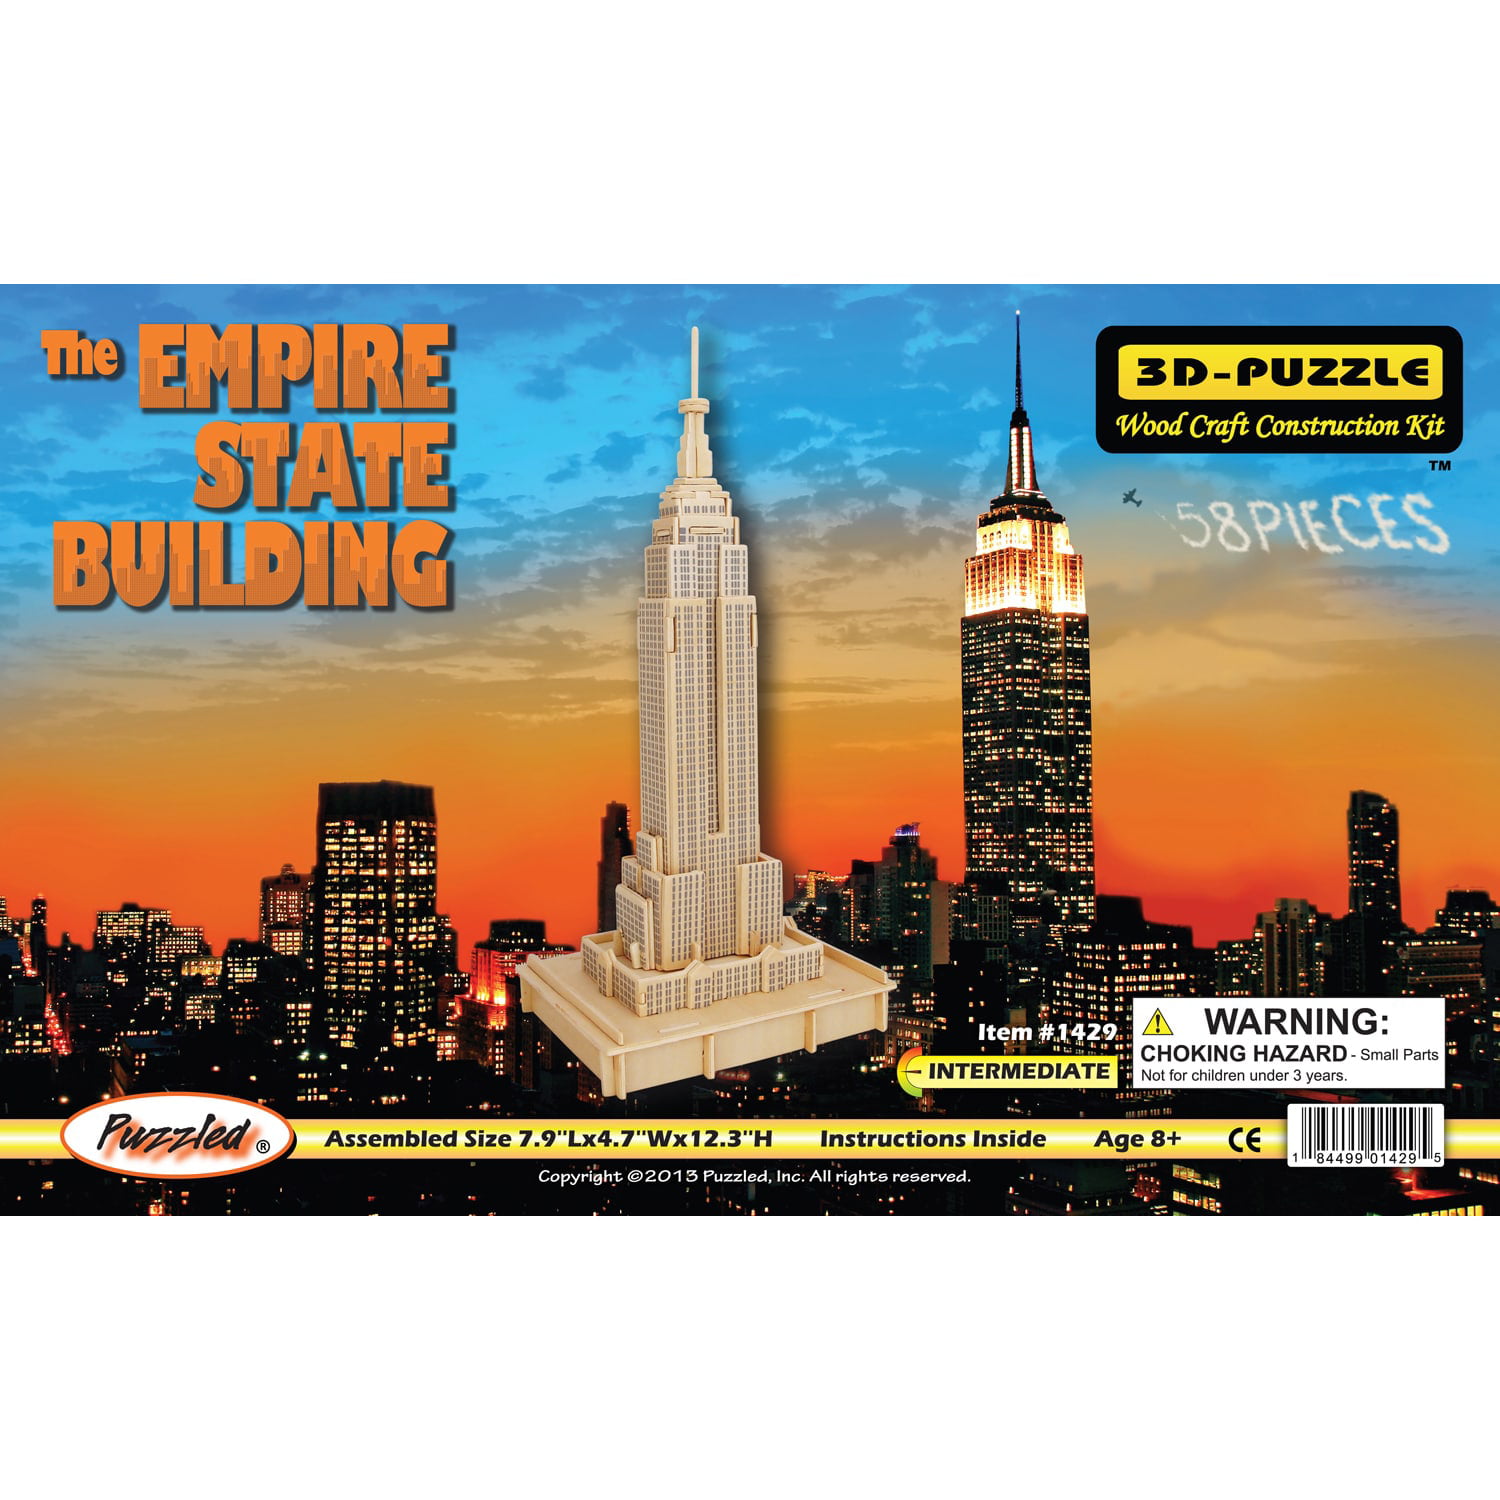 Puzzled The Statue Of Liberty Wooden 3D Puzzle Construction Kit